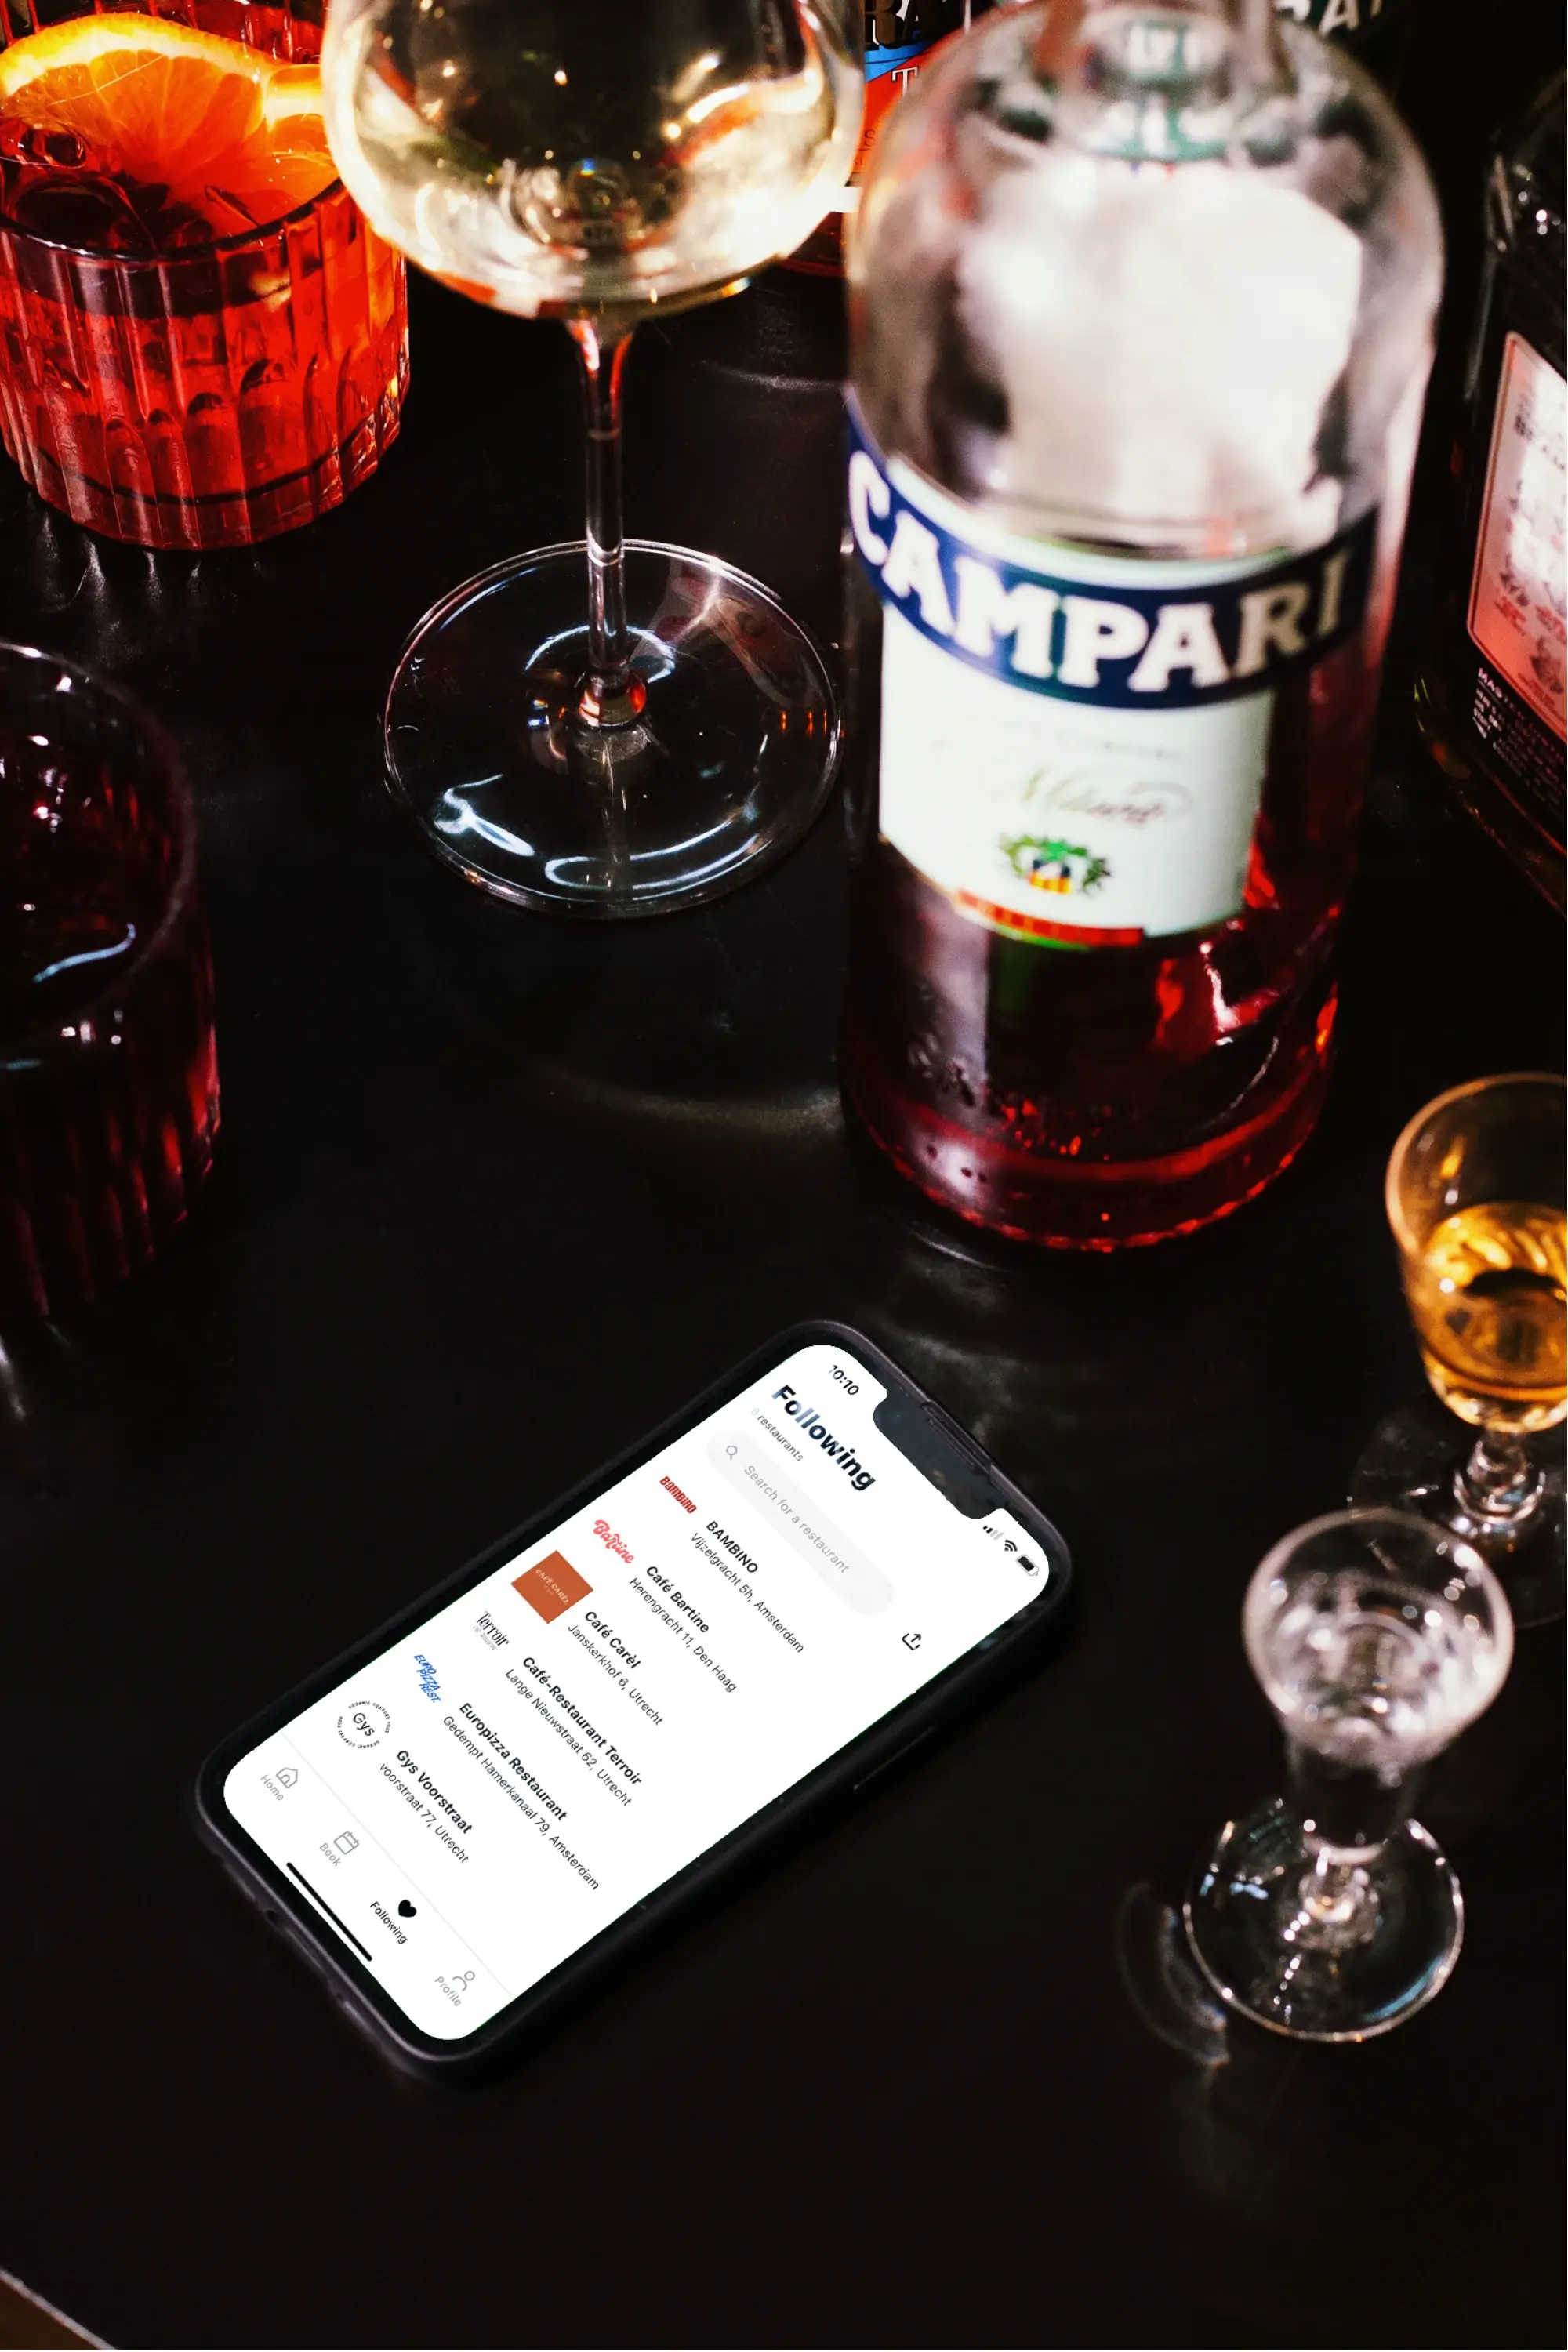 iPhone on table with the Table app opened on the restaurant wishlist page